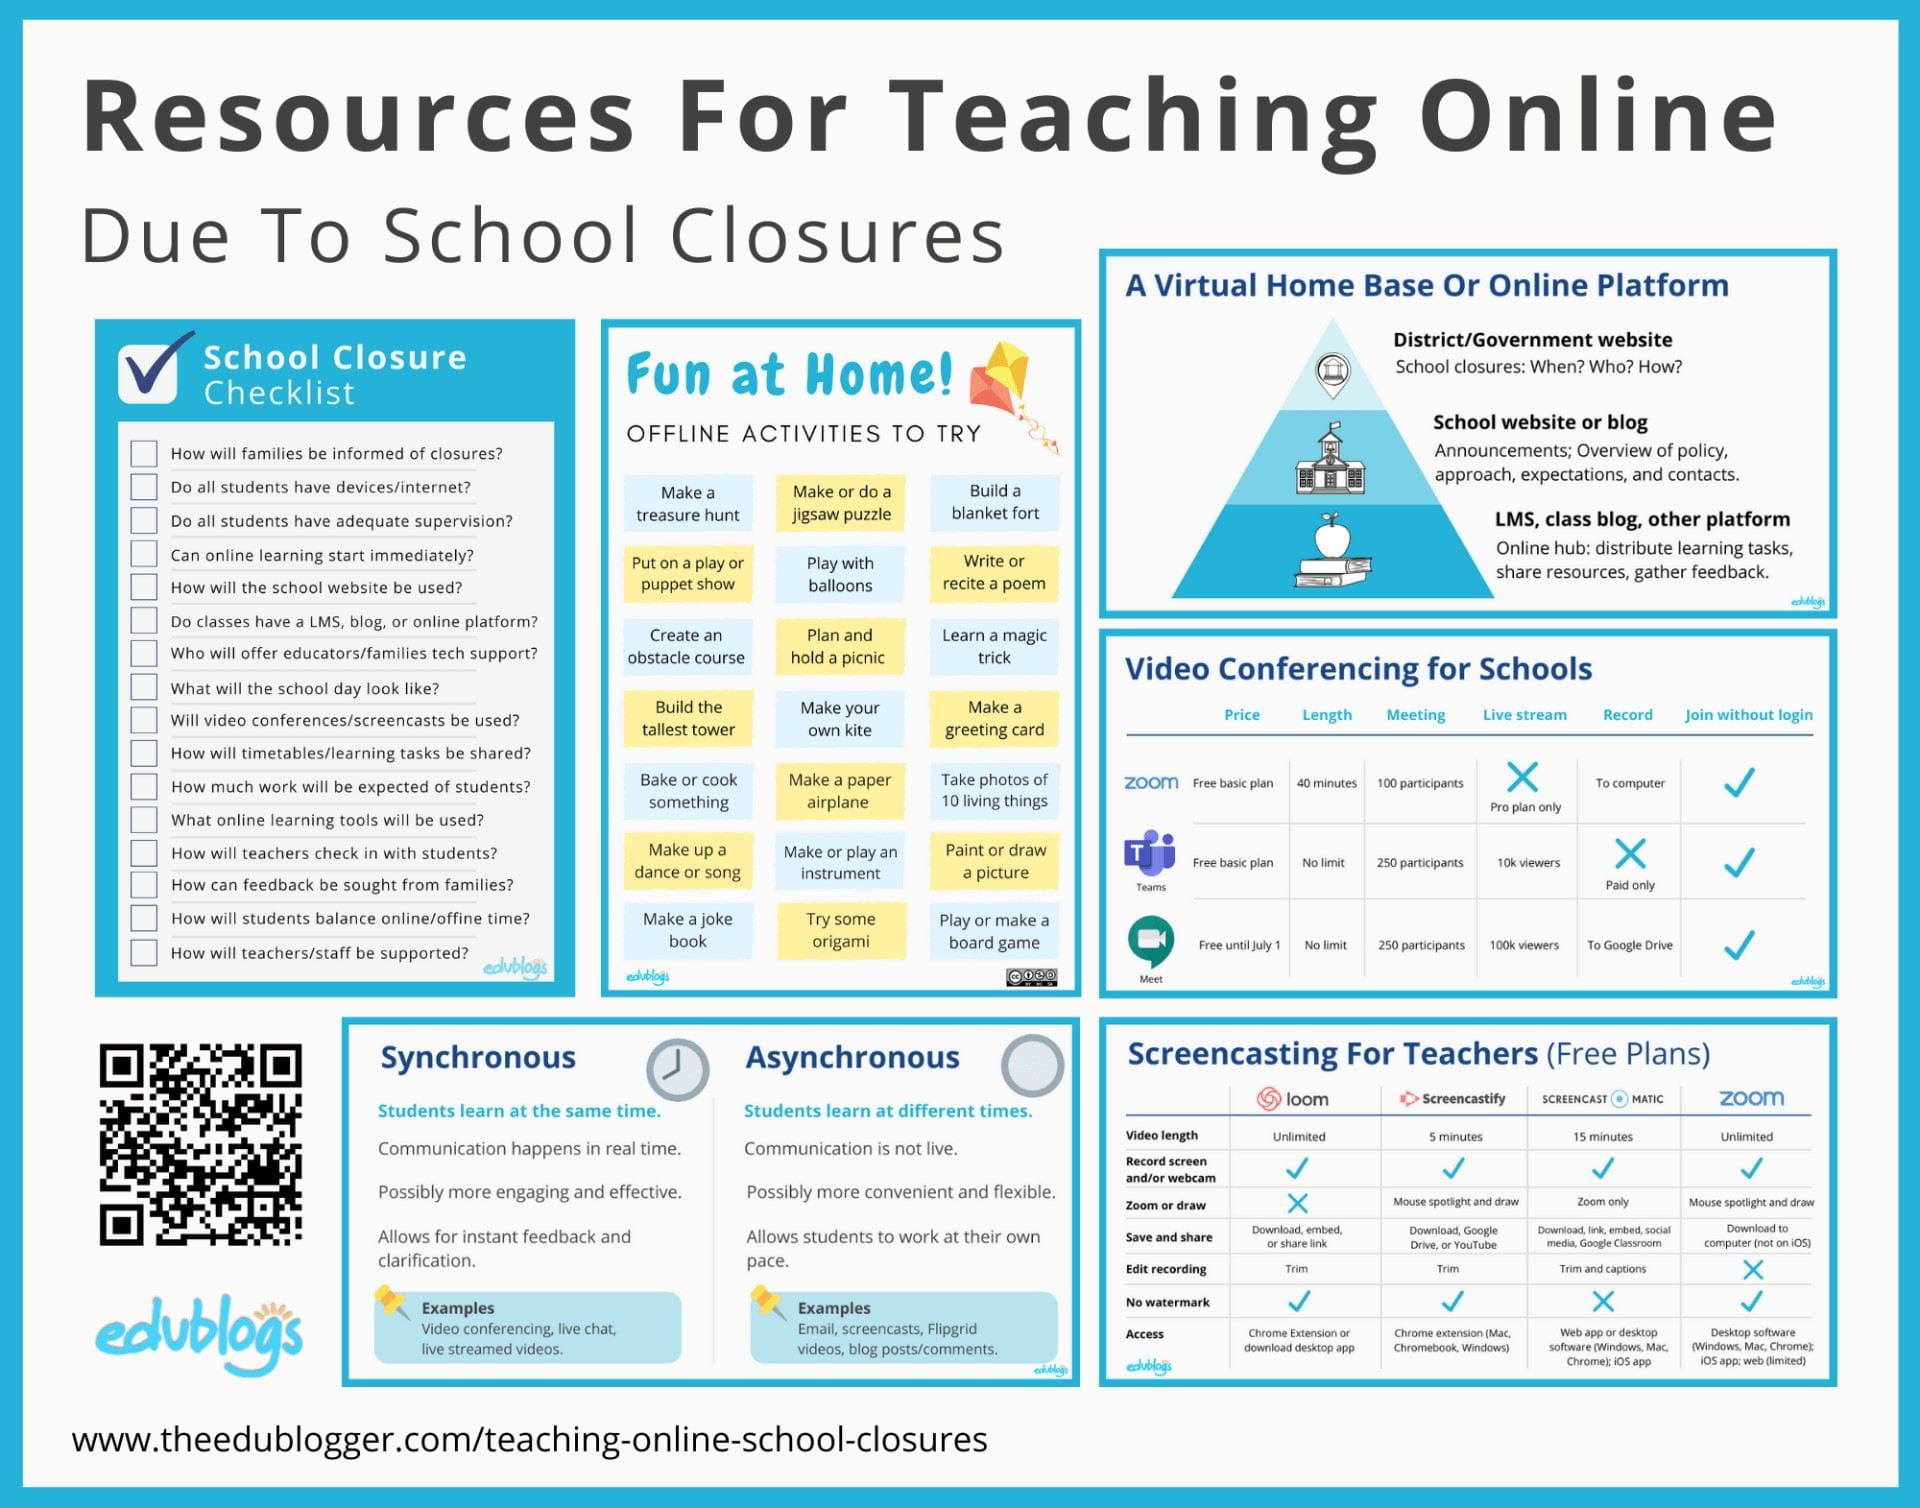 Resources For Teaching Online Due To School Closures The Edublogger